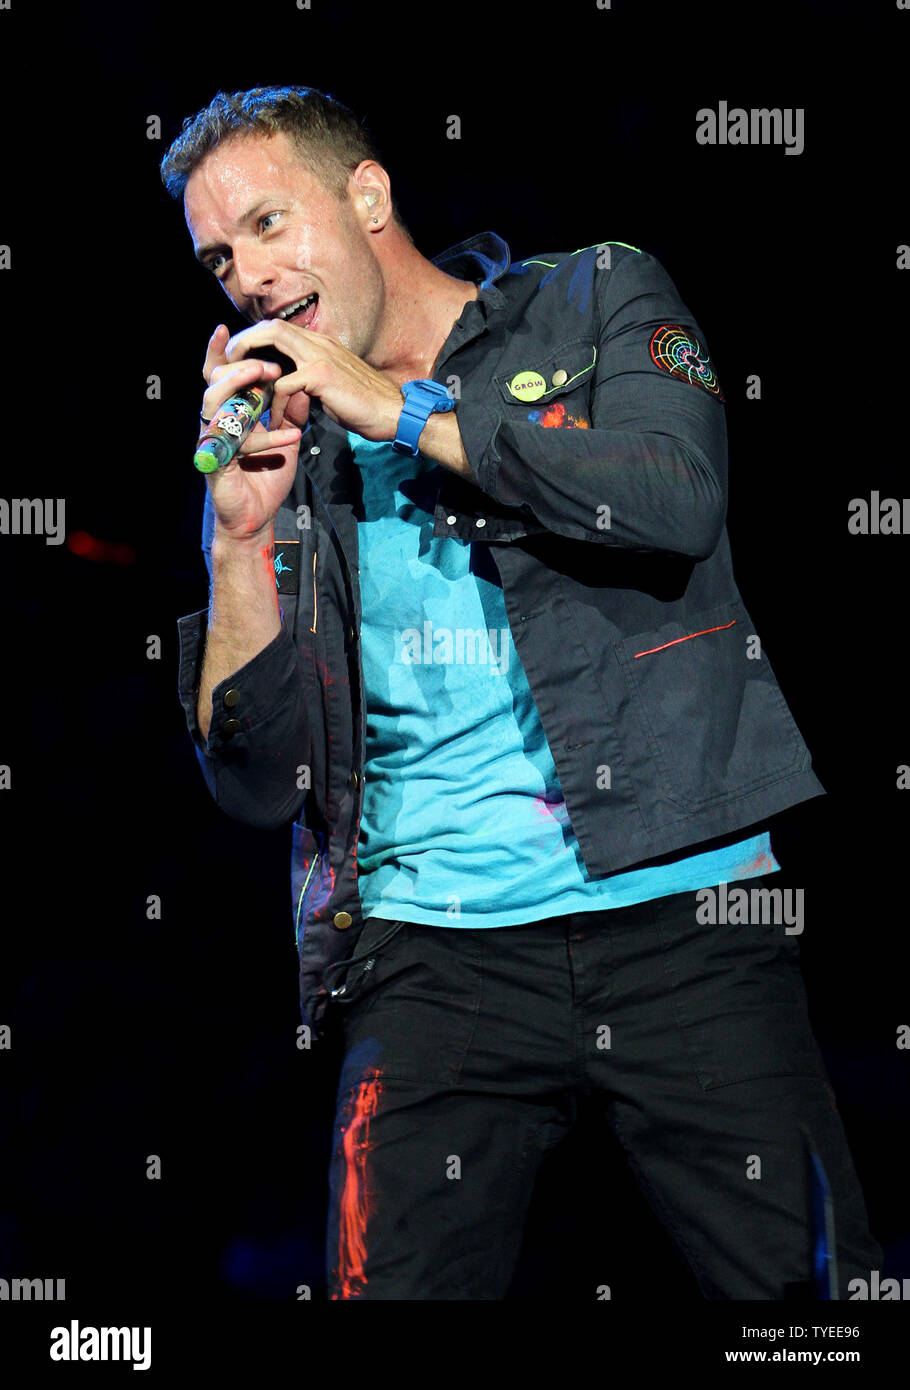 Chris Martin with Coldplay performs in concert on their Mylo Xyloto tour 2012 at the American Airlines Arena in Miami on June 29, 2012. UPI/Michael Bush Stock Photo